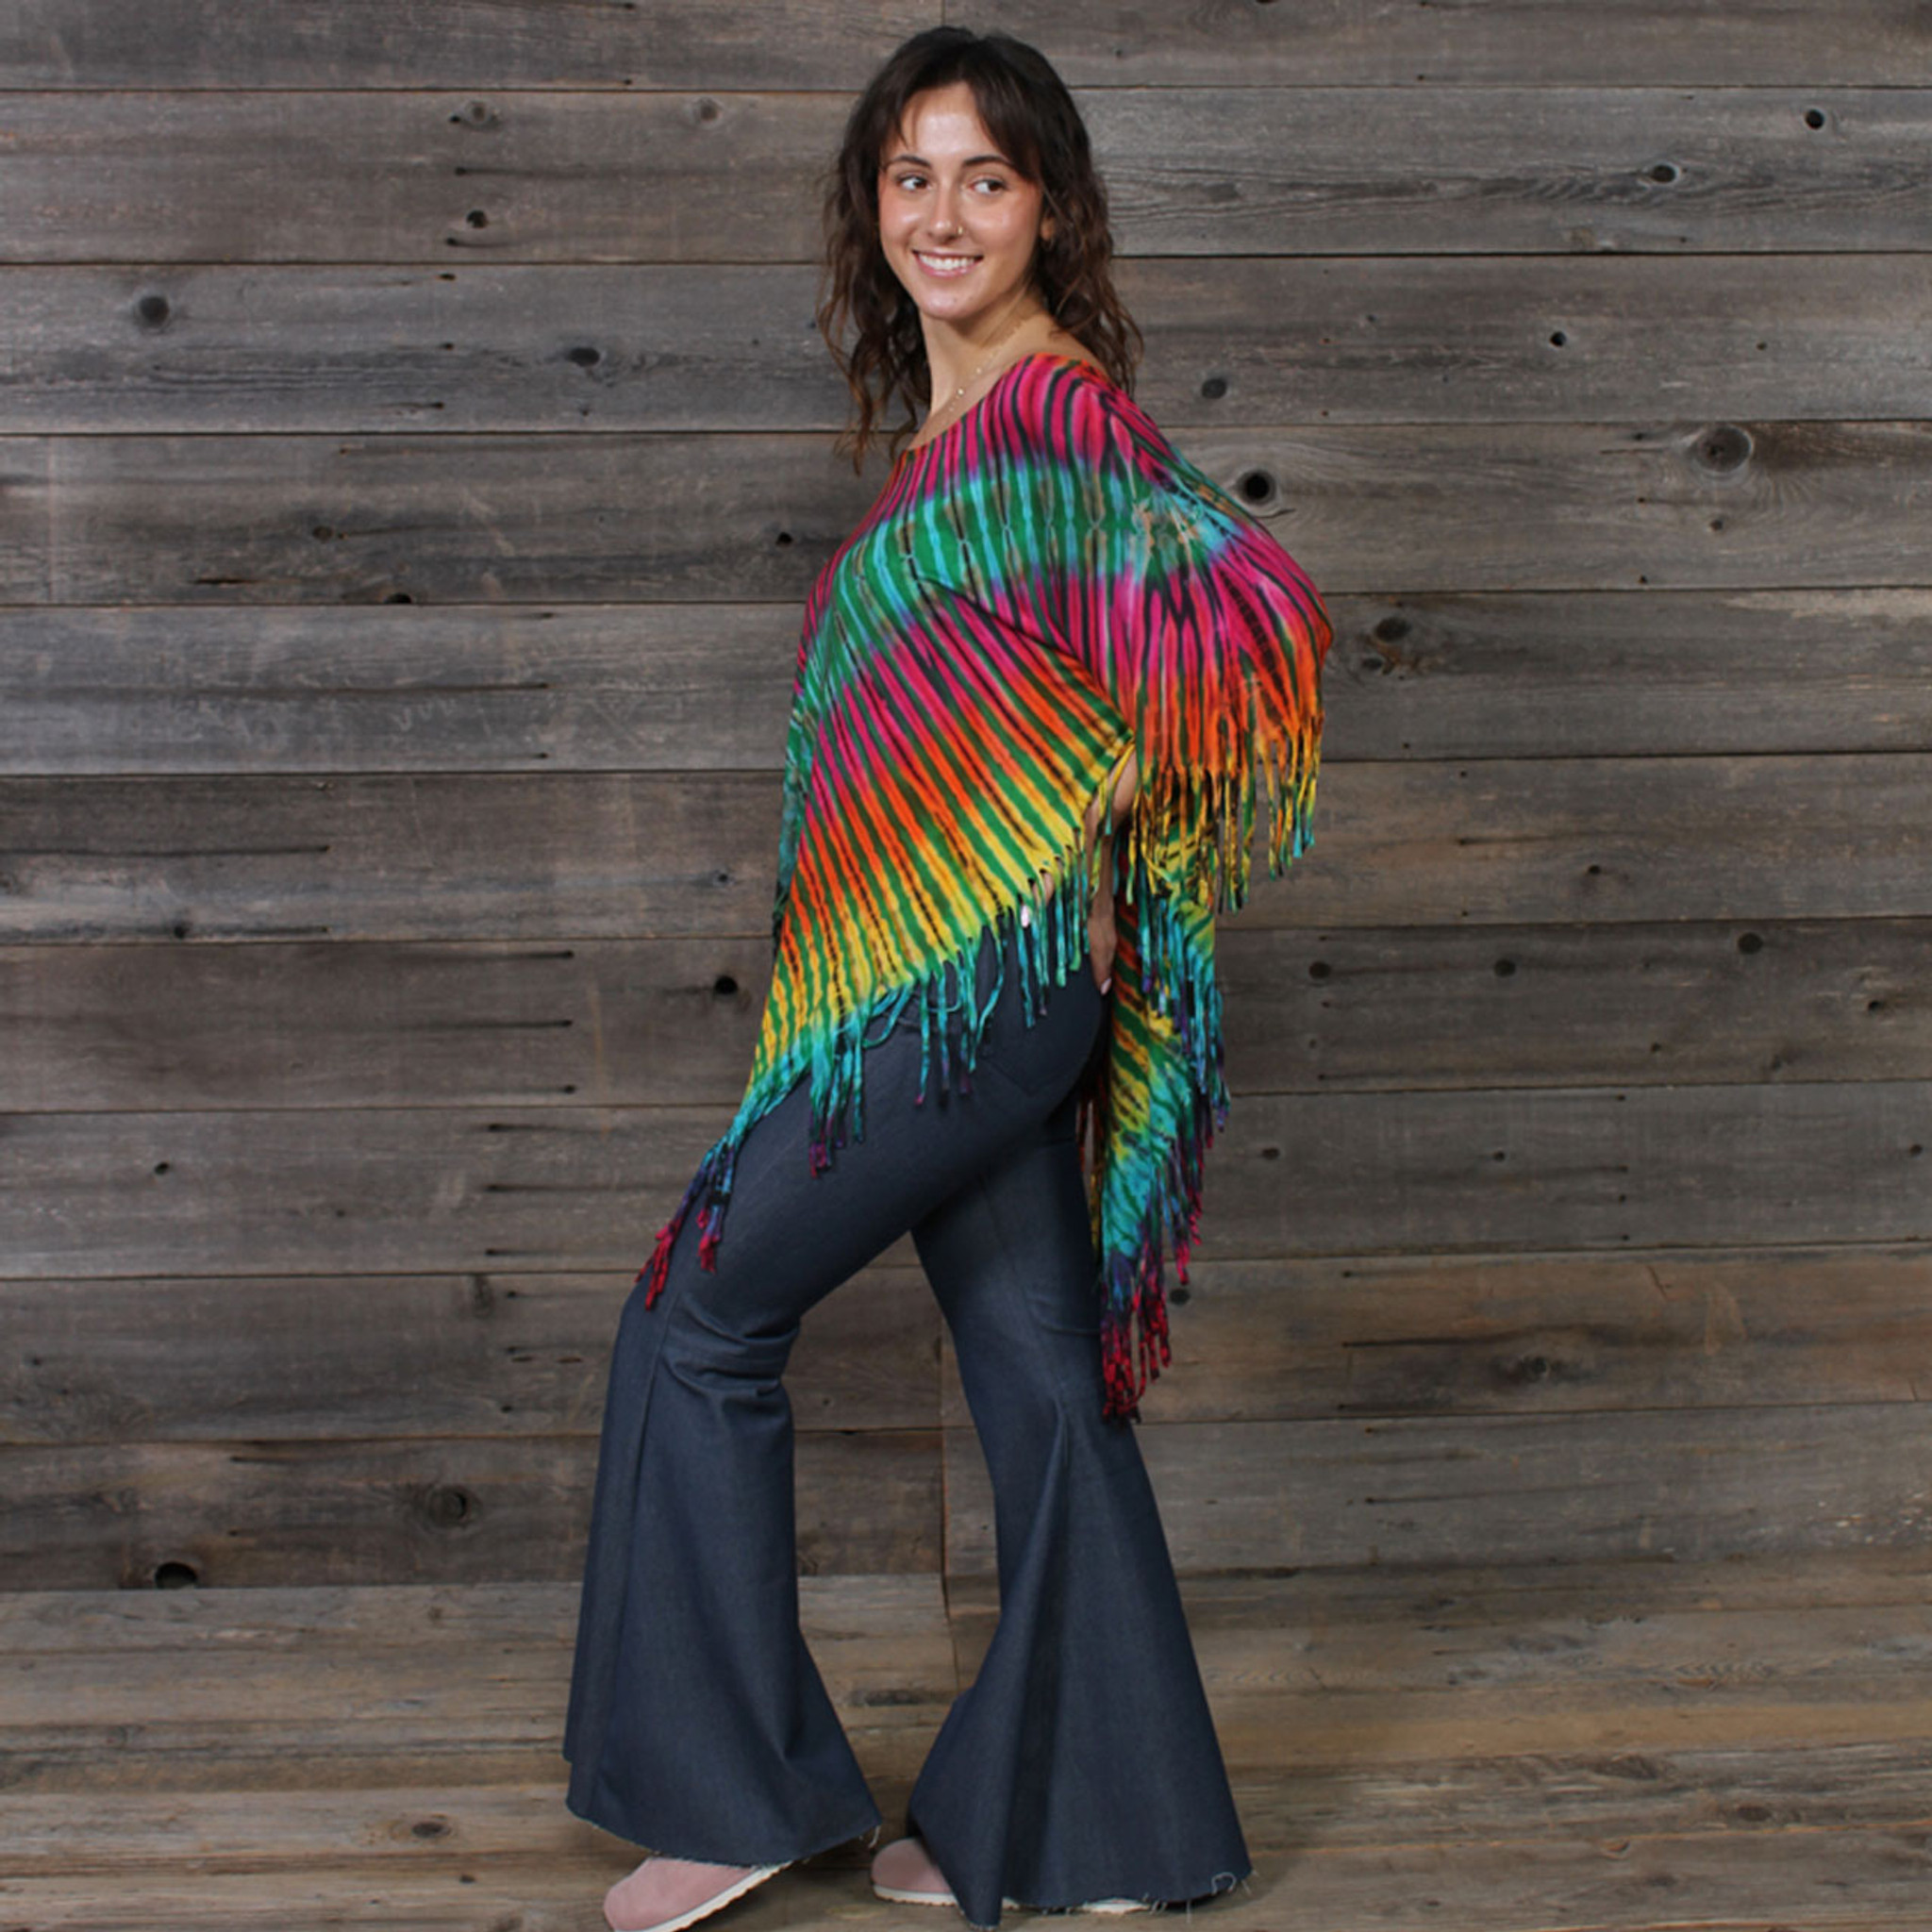 IN THE BRIGHT LIGHT FRINGE PONCHO Rayon Spandex Fringe Poncho Top Green Rainbow Tie Dye